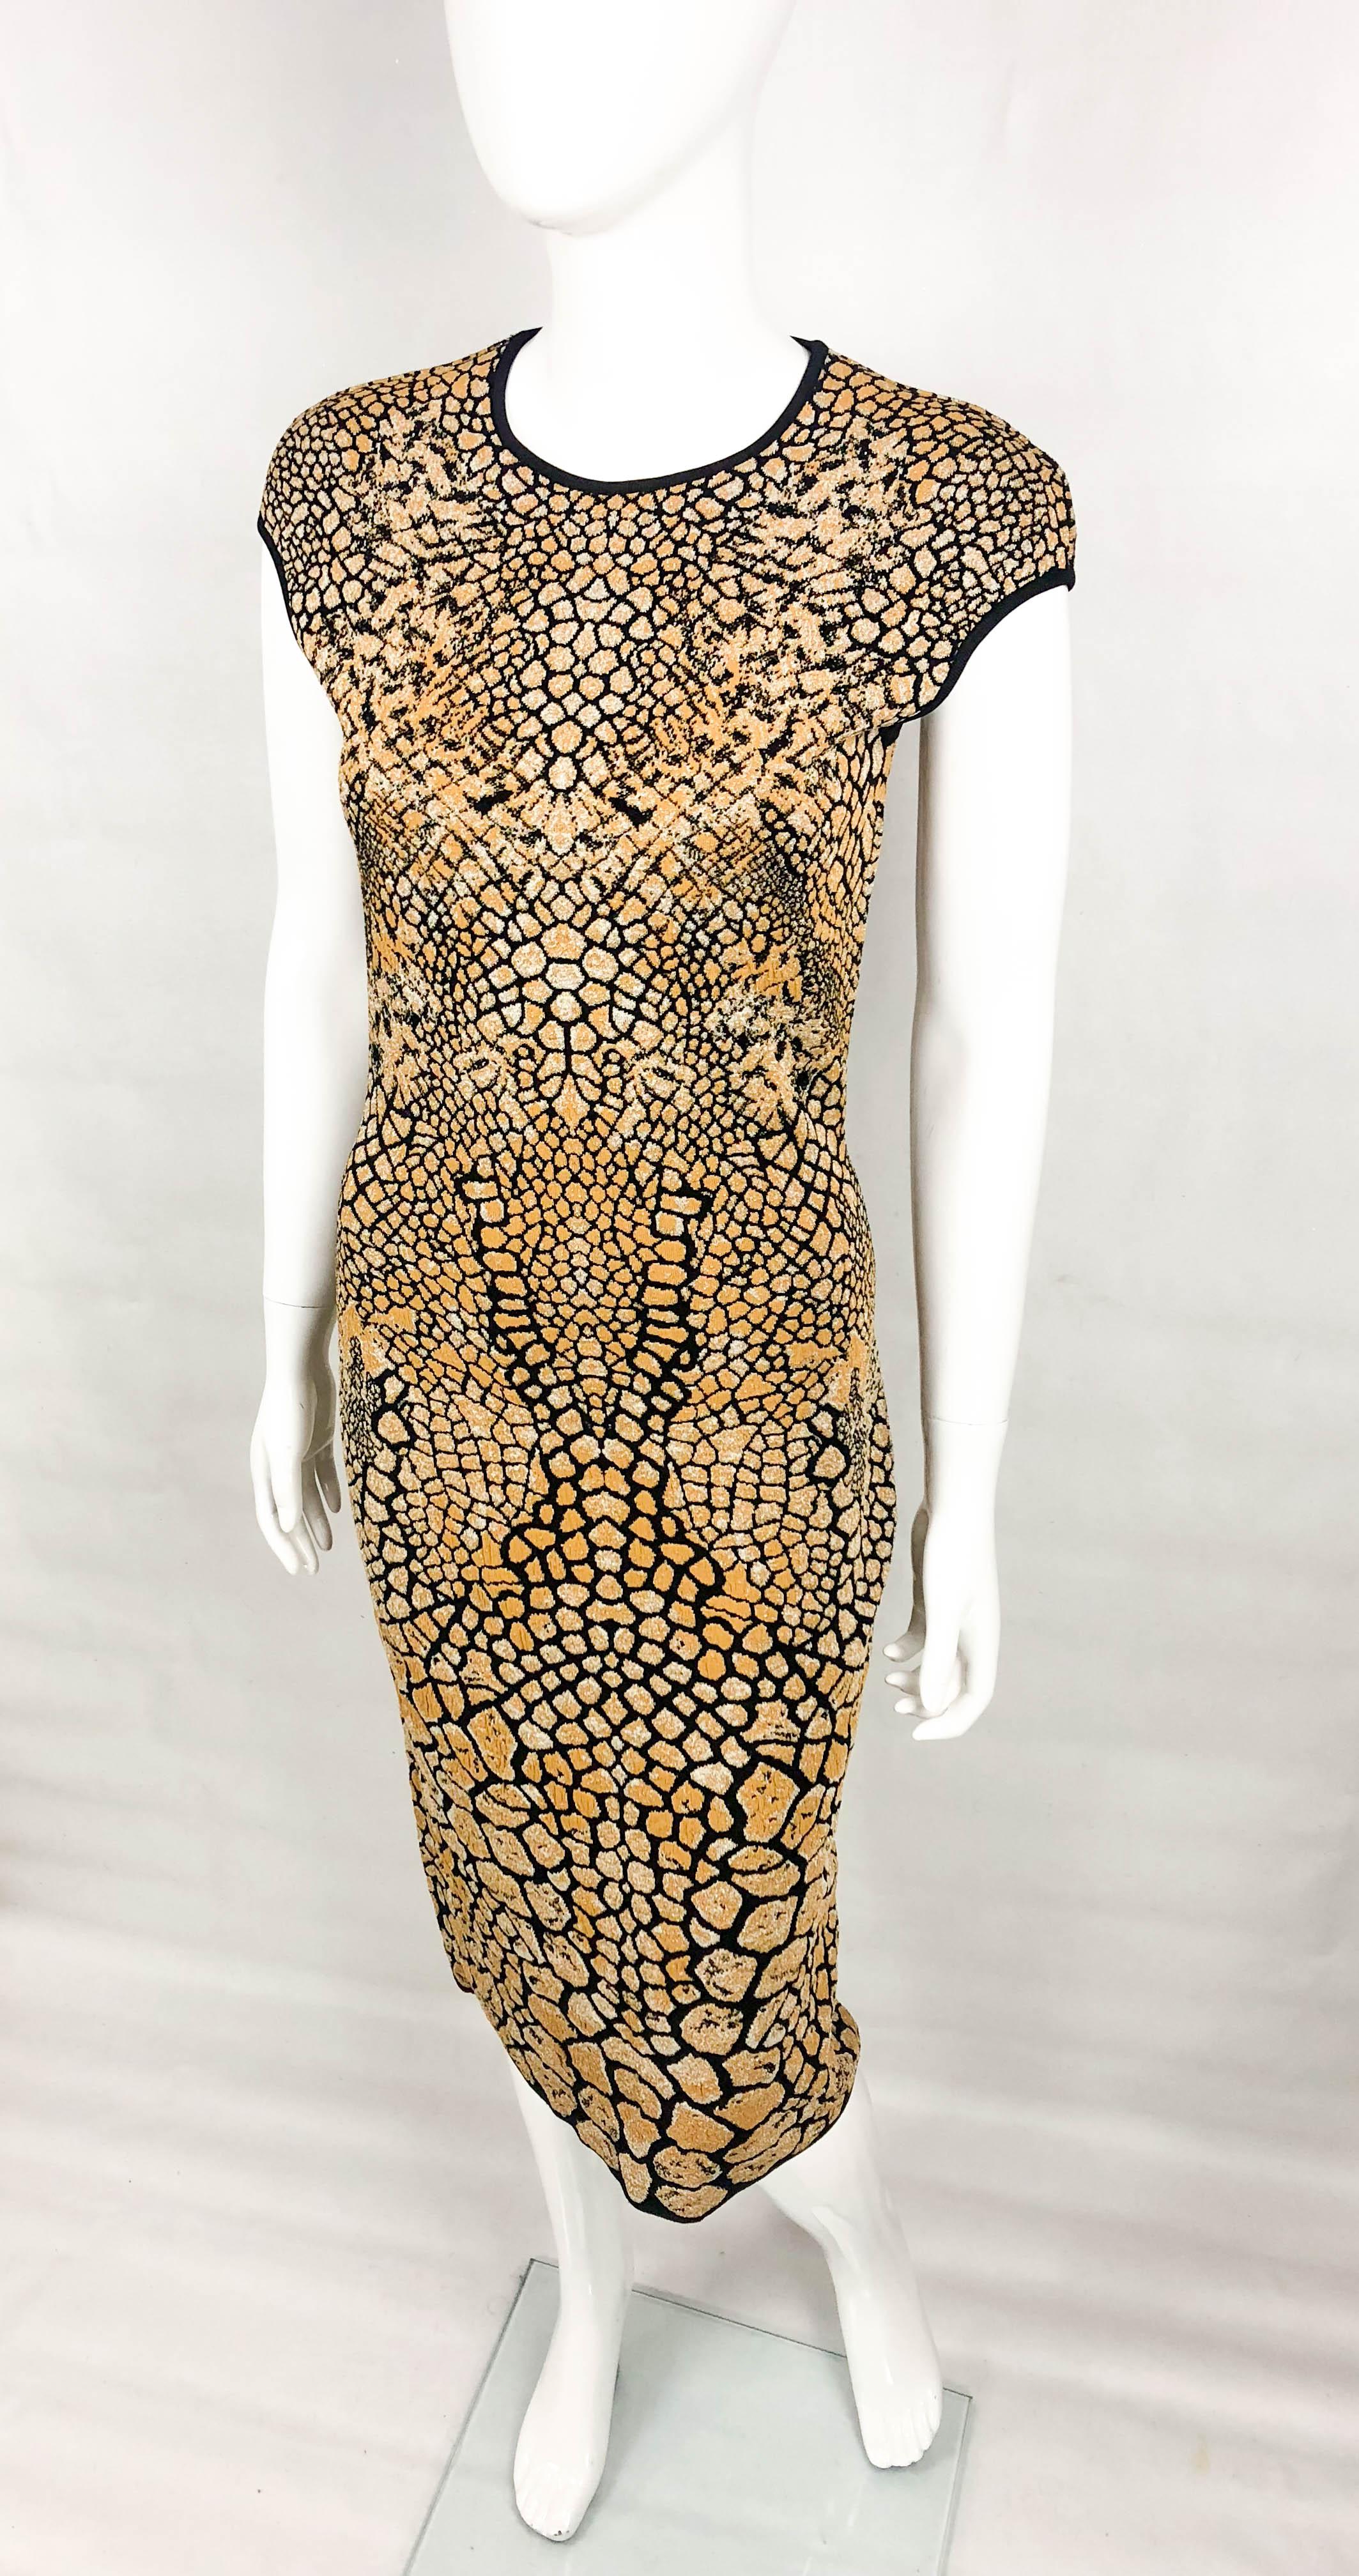 2009 Alexander McQueen Stretch Knit Golden and Black Dress For Sale 4